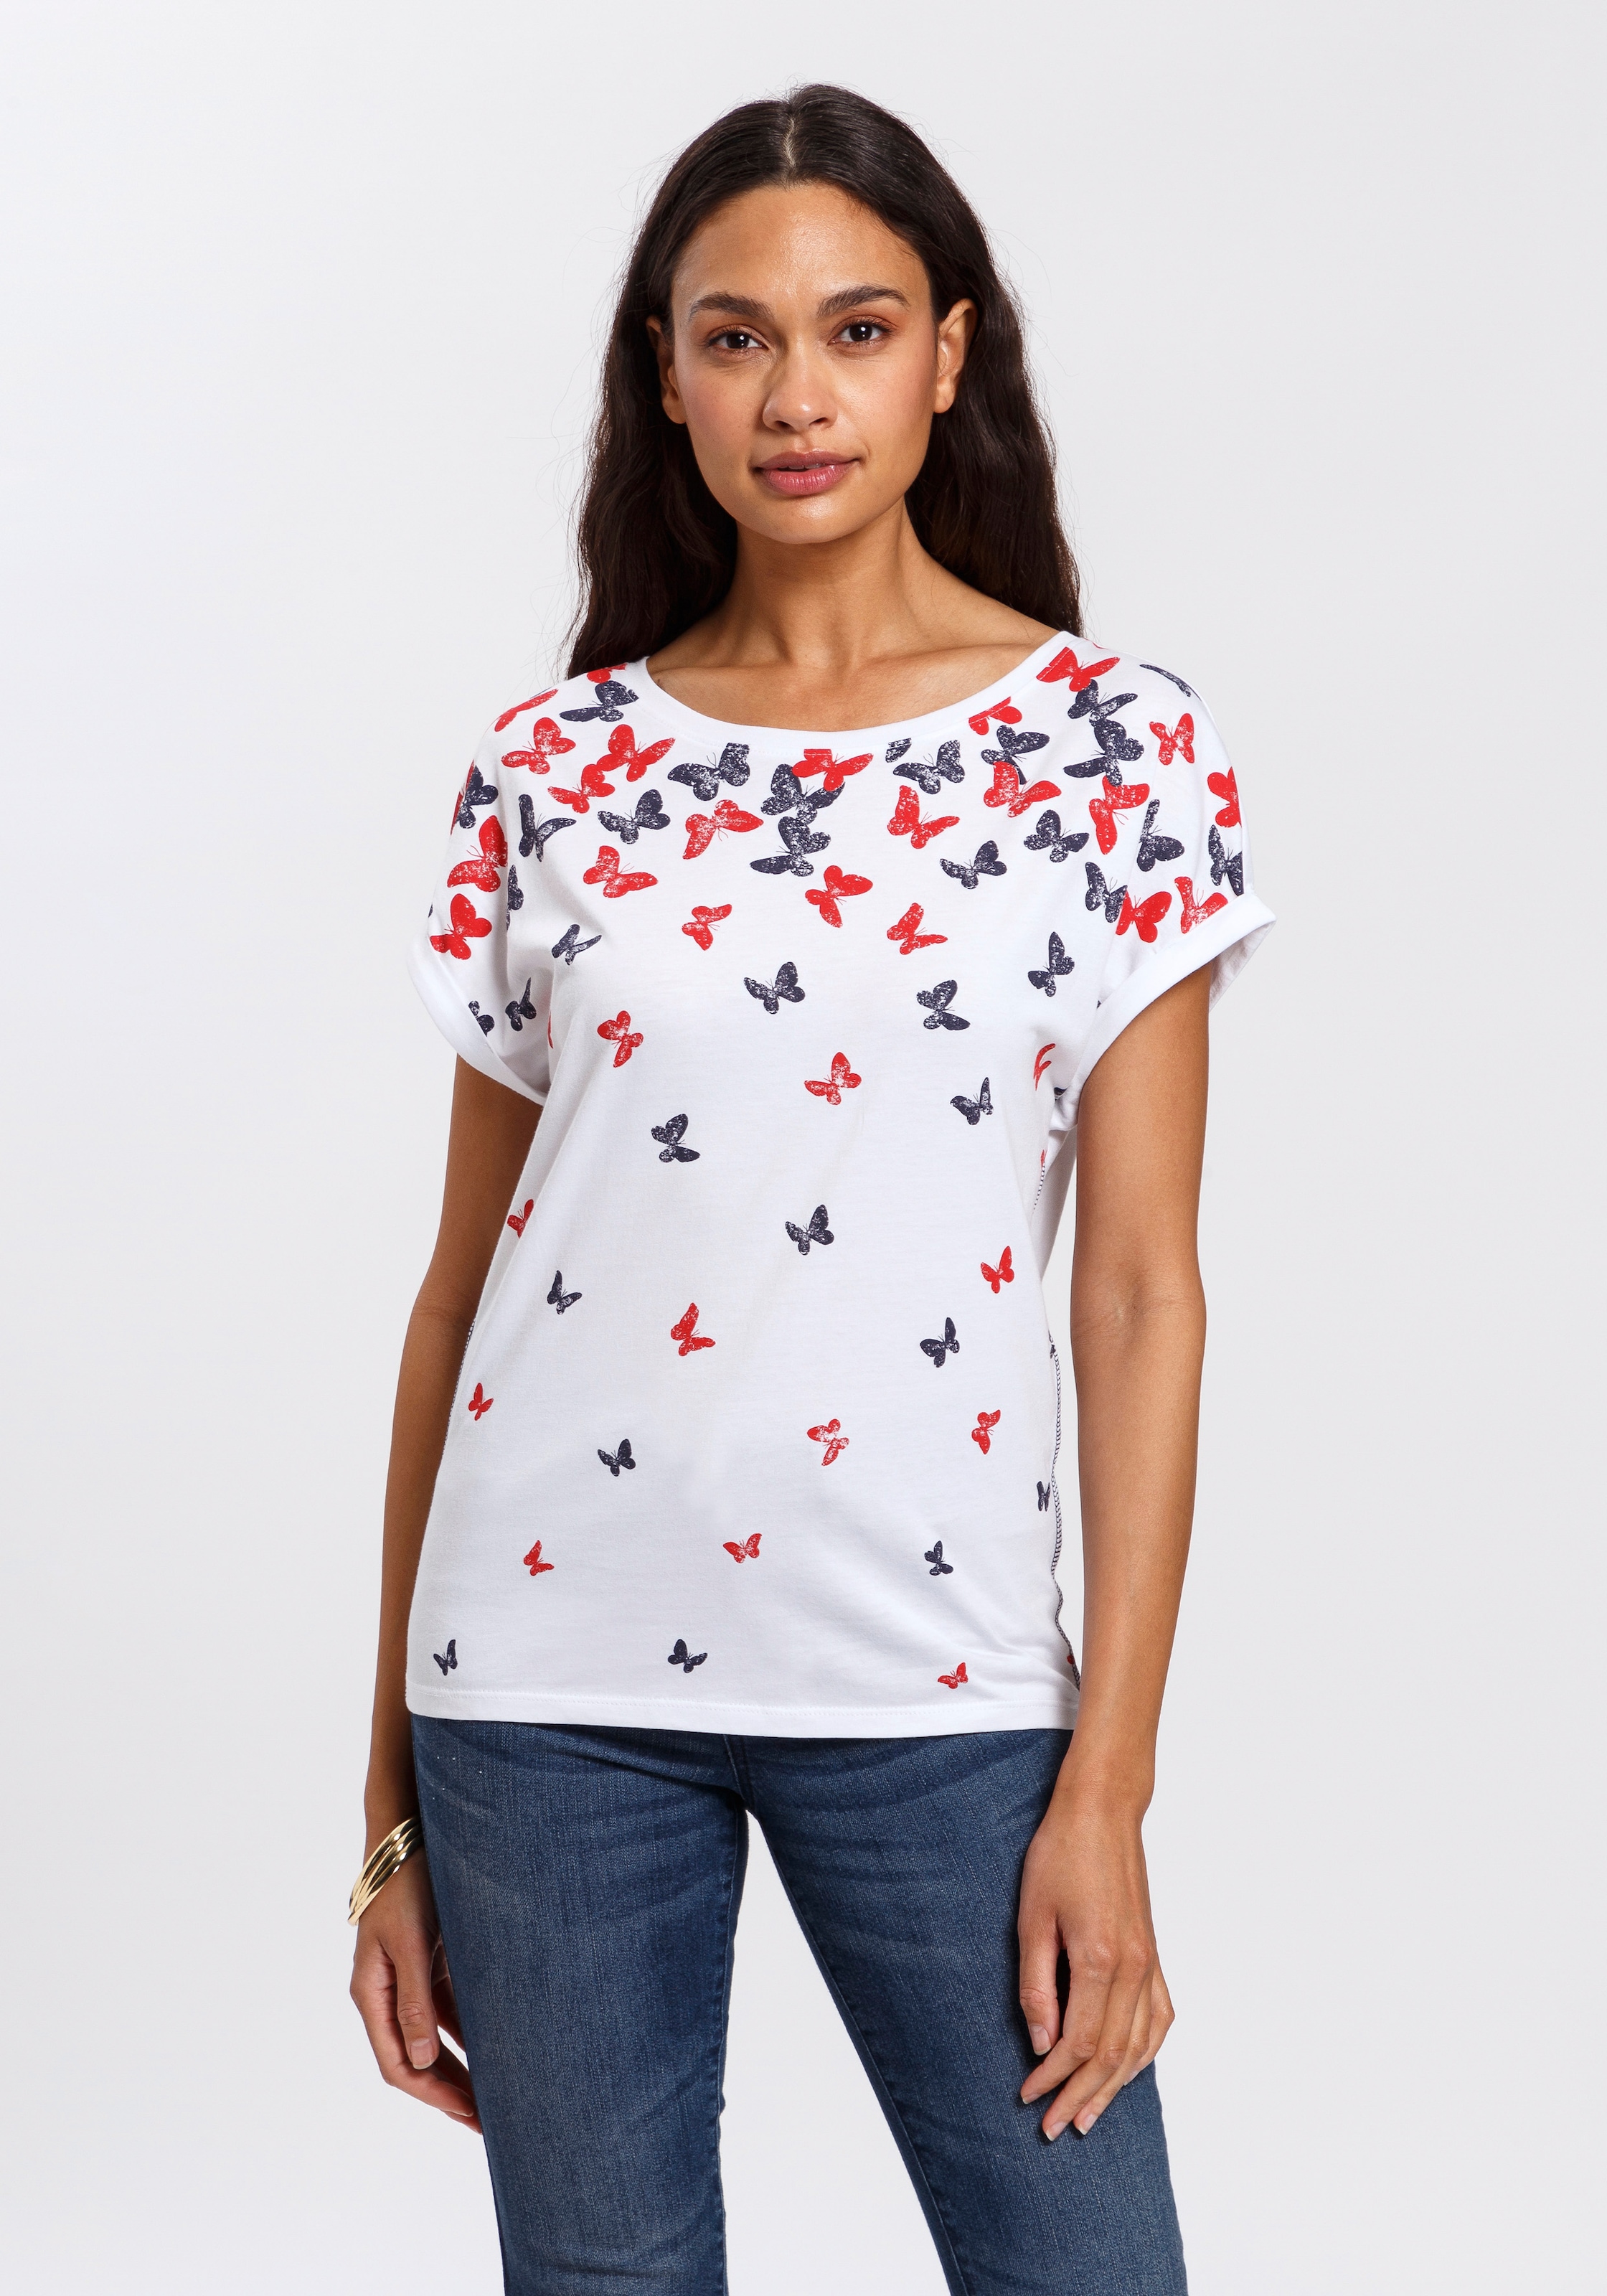 Team Polo bei TOM mit niedlichem ♕ T-Shirt, TAILOR All-Over Print